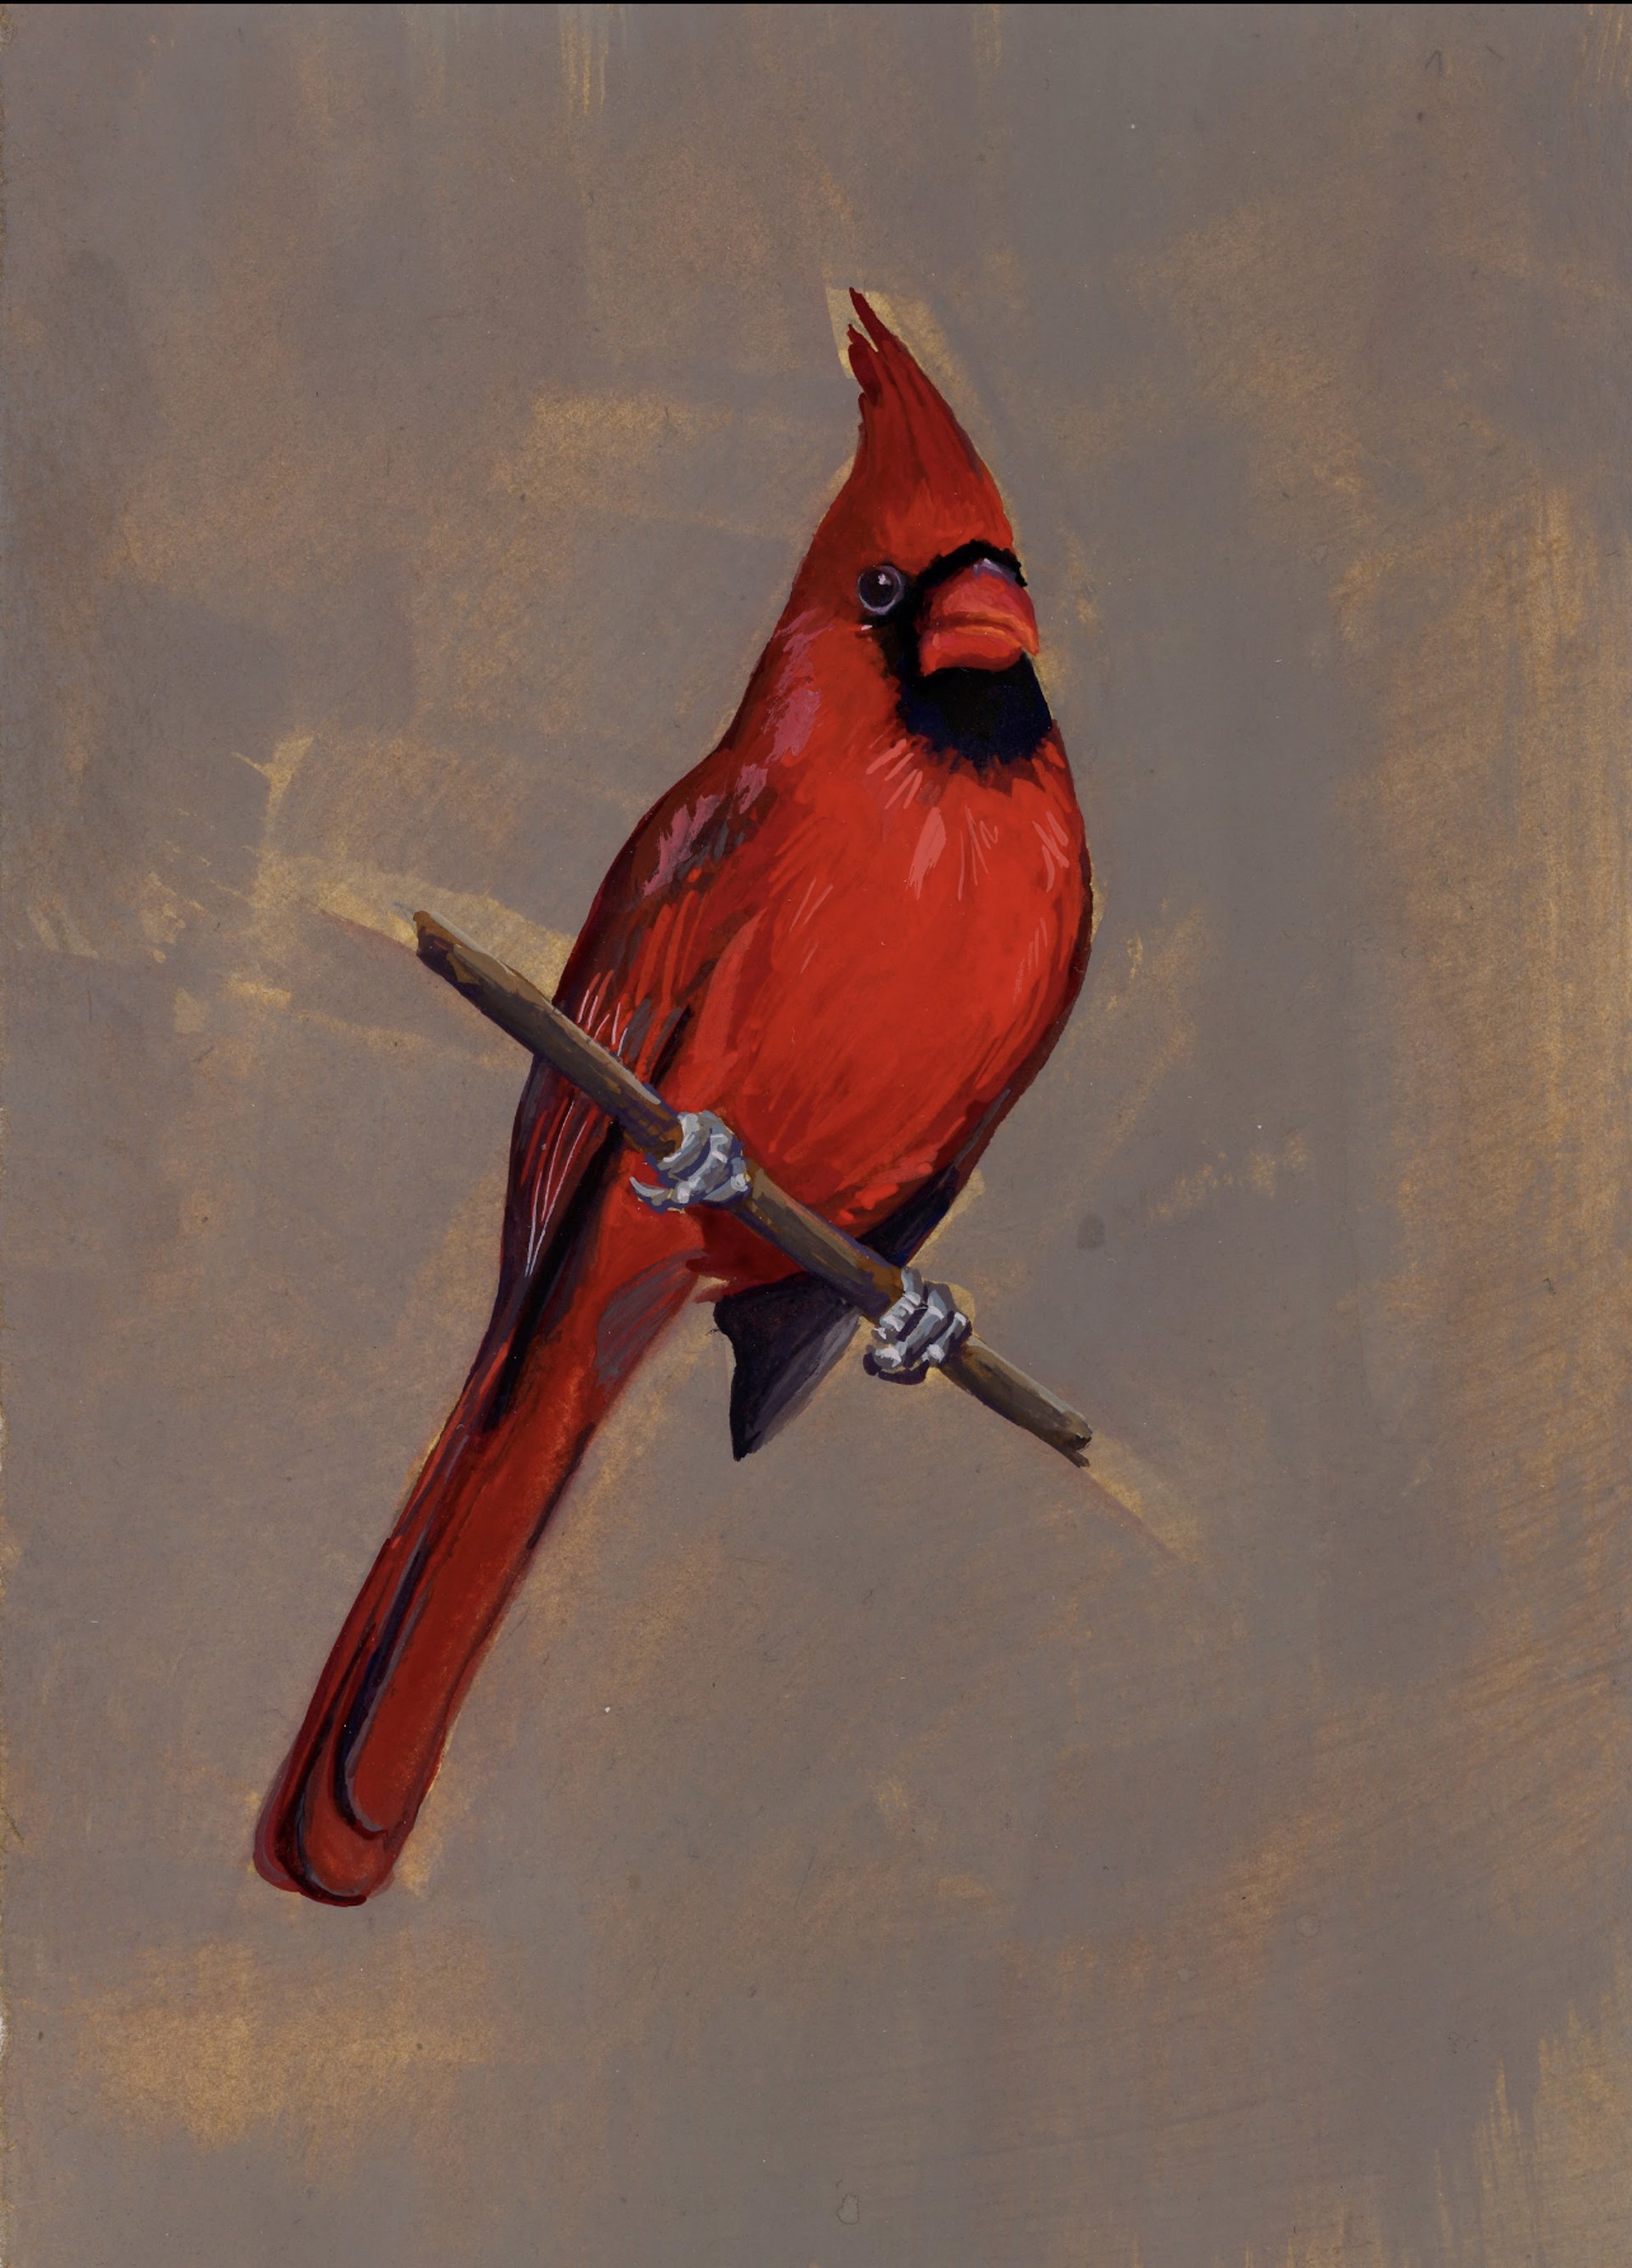 Male and Female Cardinals, pair by Noelle Holler